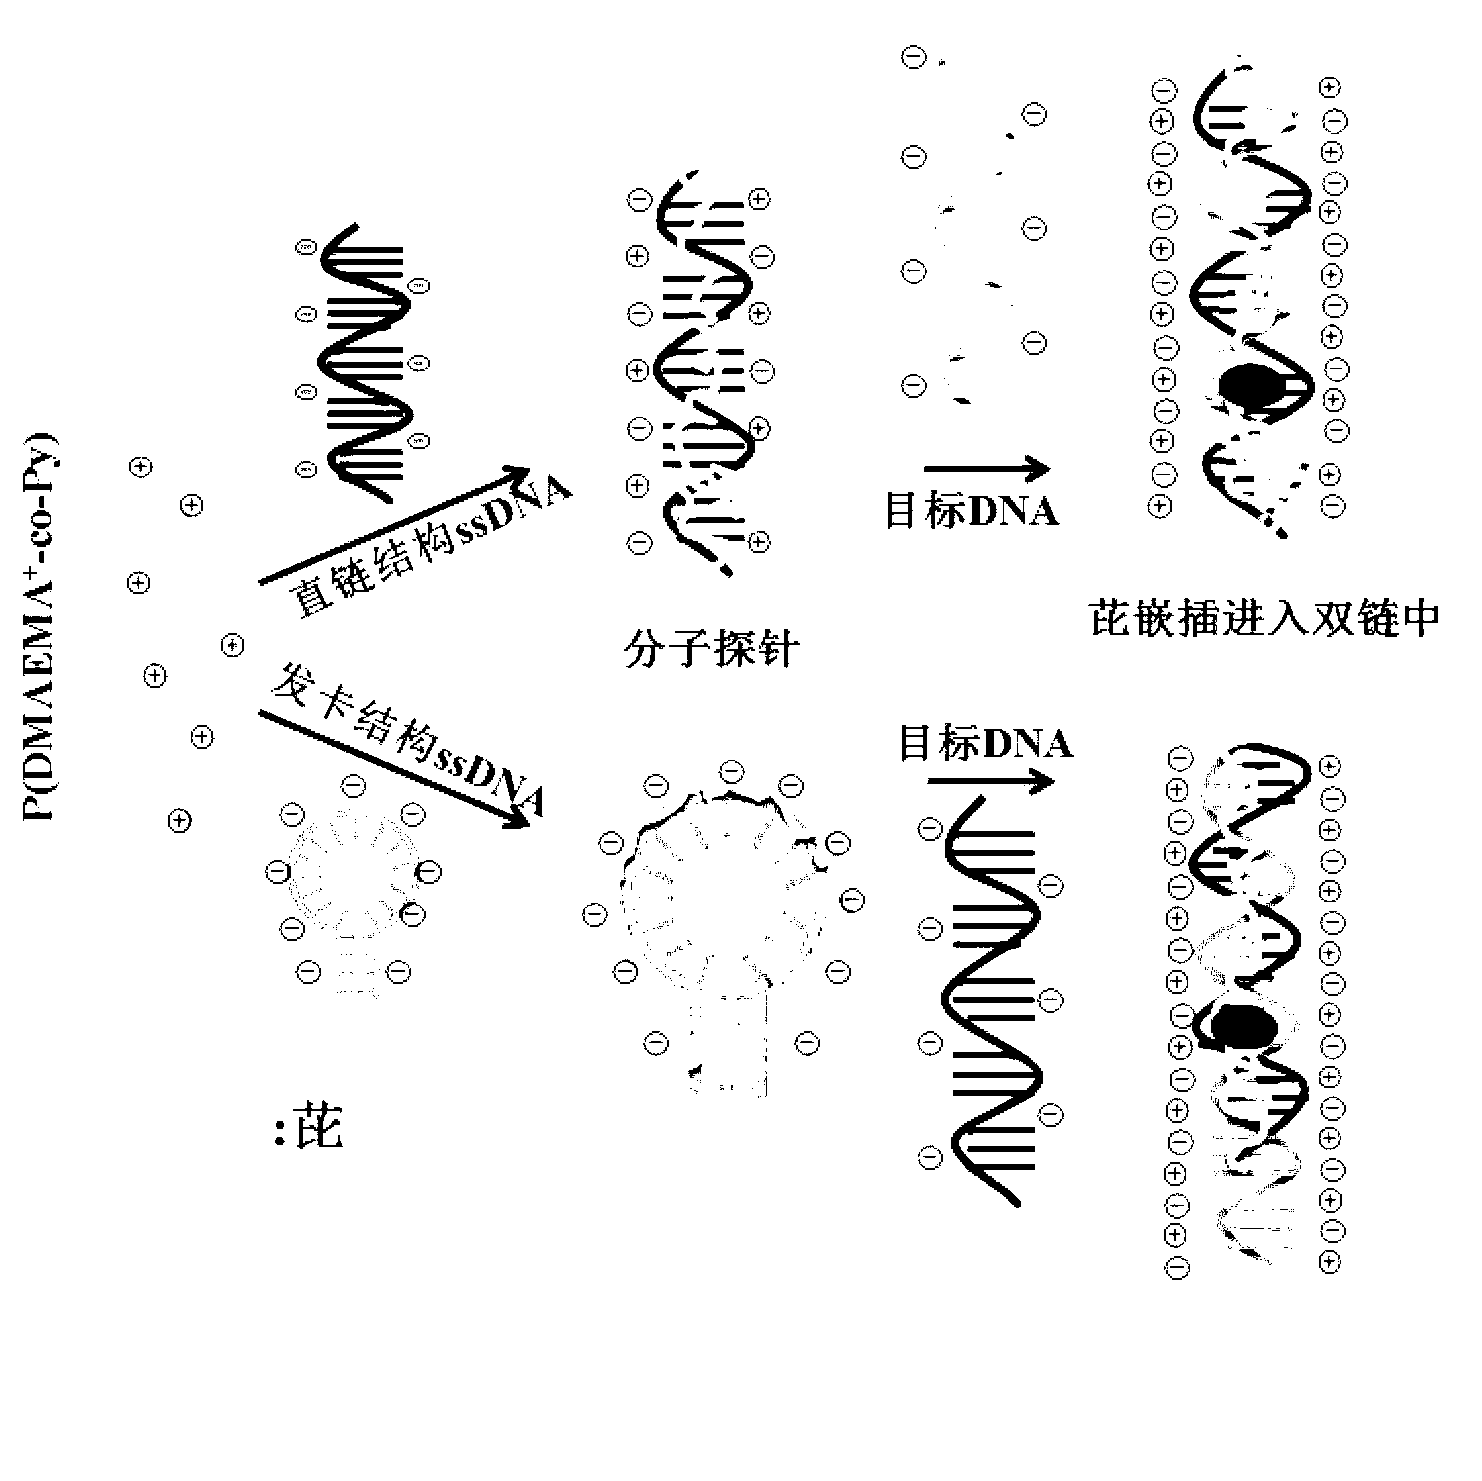 Method for detecting nucleotide sequence by using poly(methyl acrylic pyrene-poly (methyl) acrylic dimethylamine ethyl ester copolymer, and product thereof